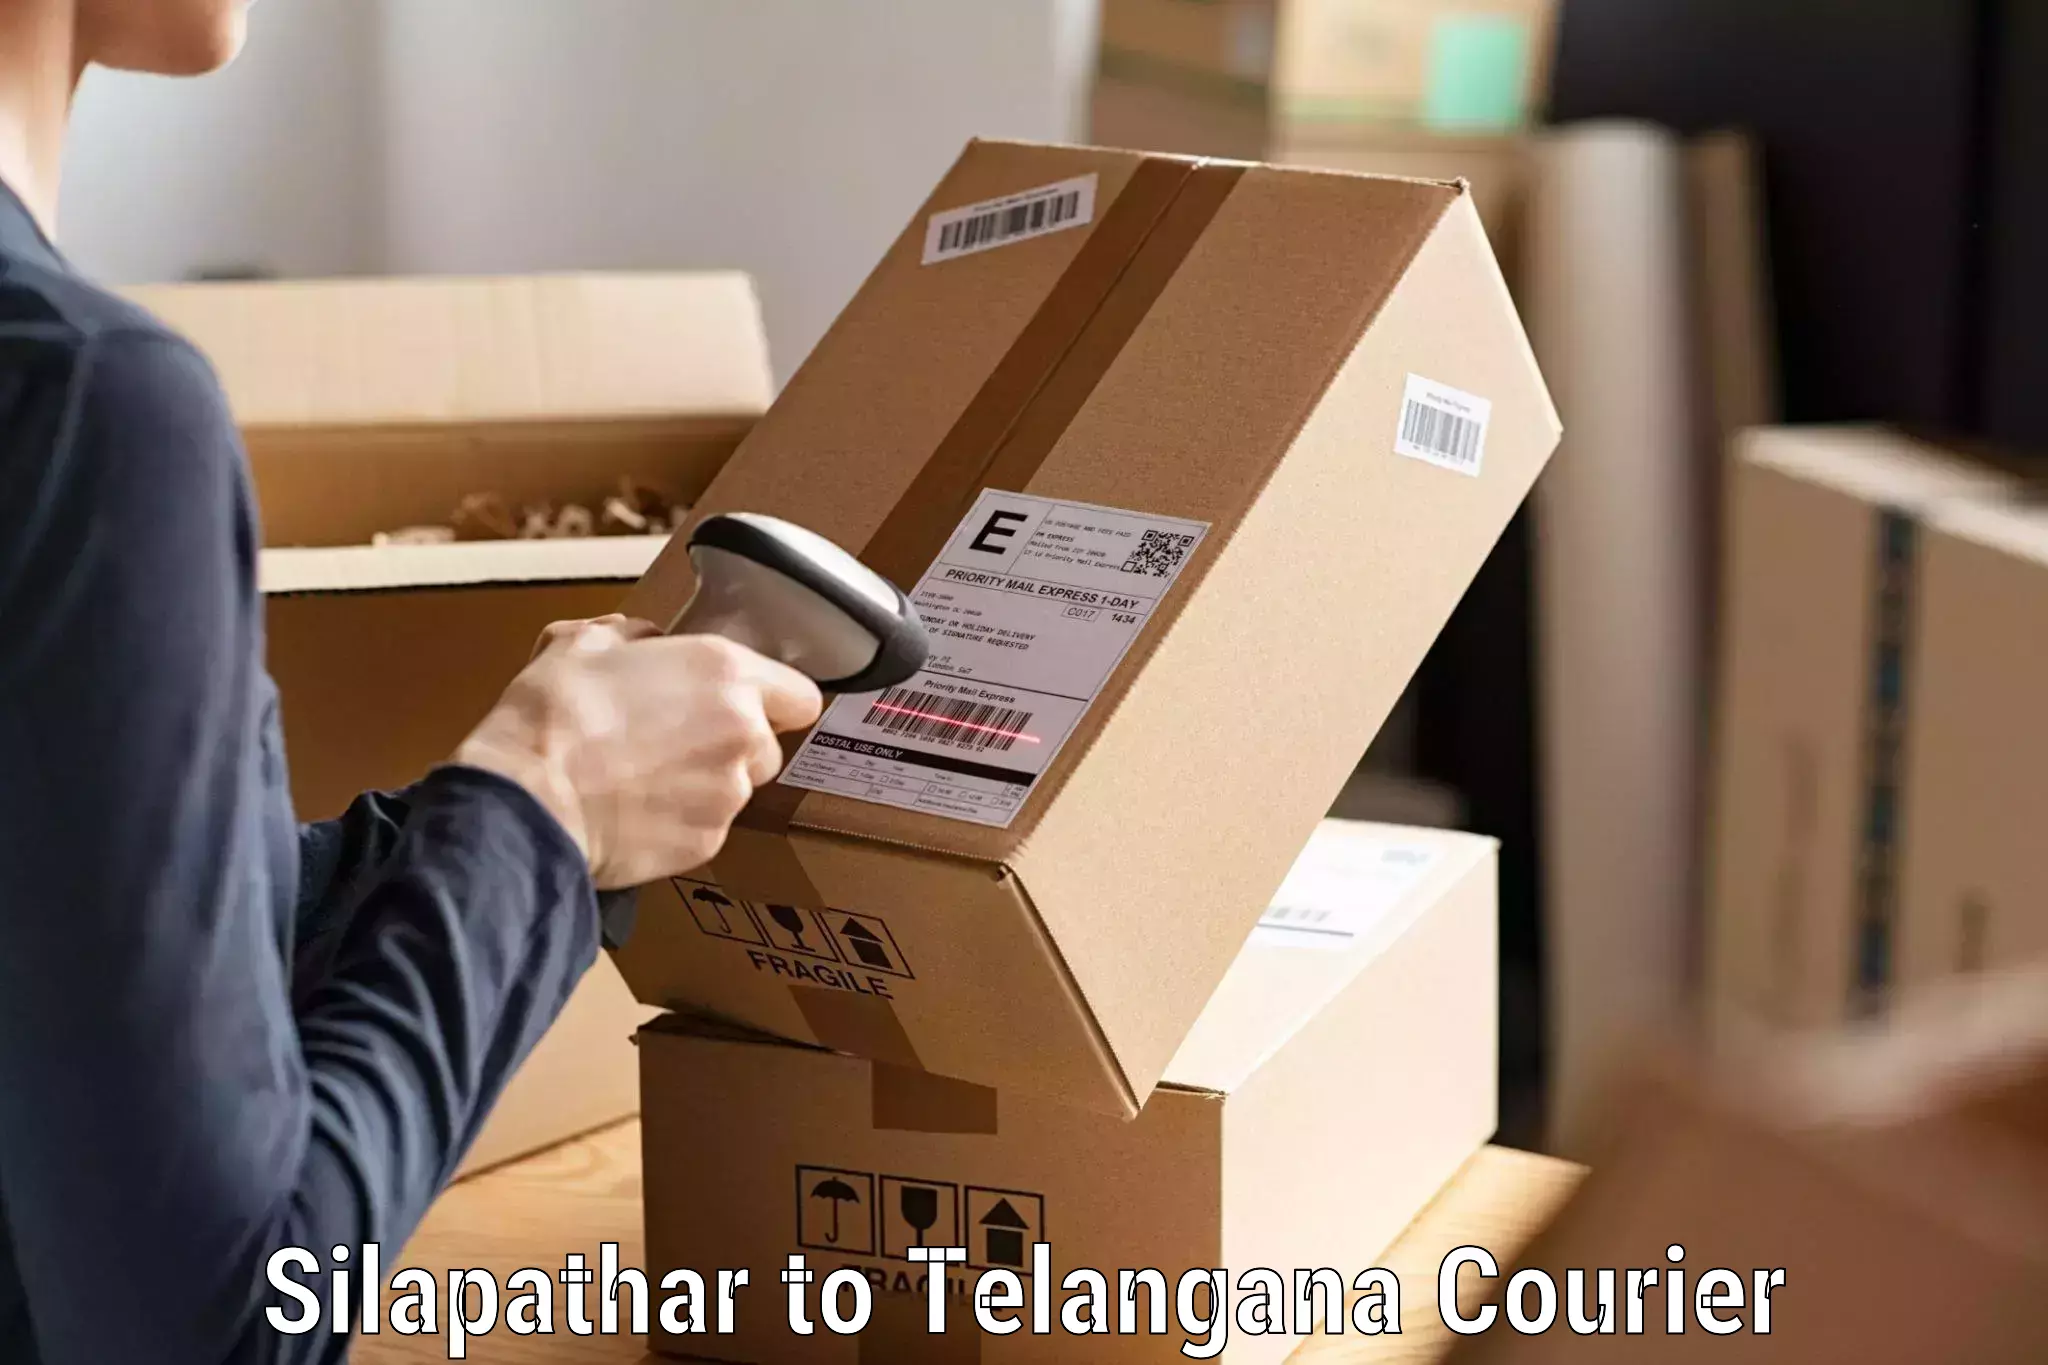 Advanced parcel tracking Silapathar to Sathupally